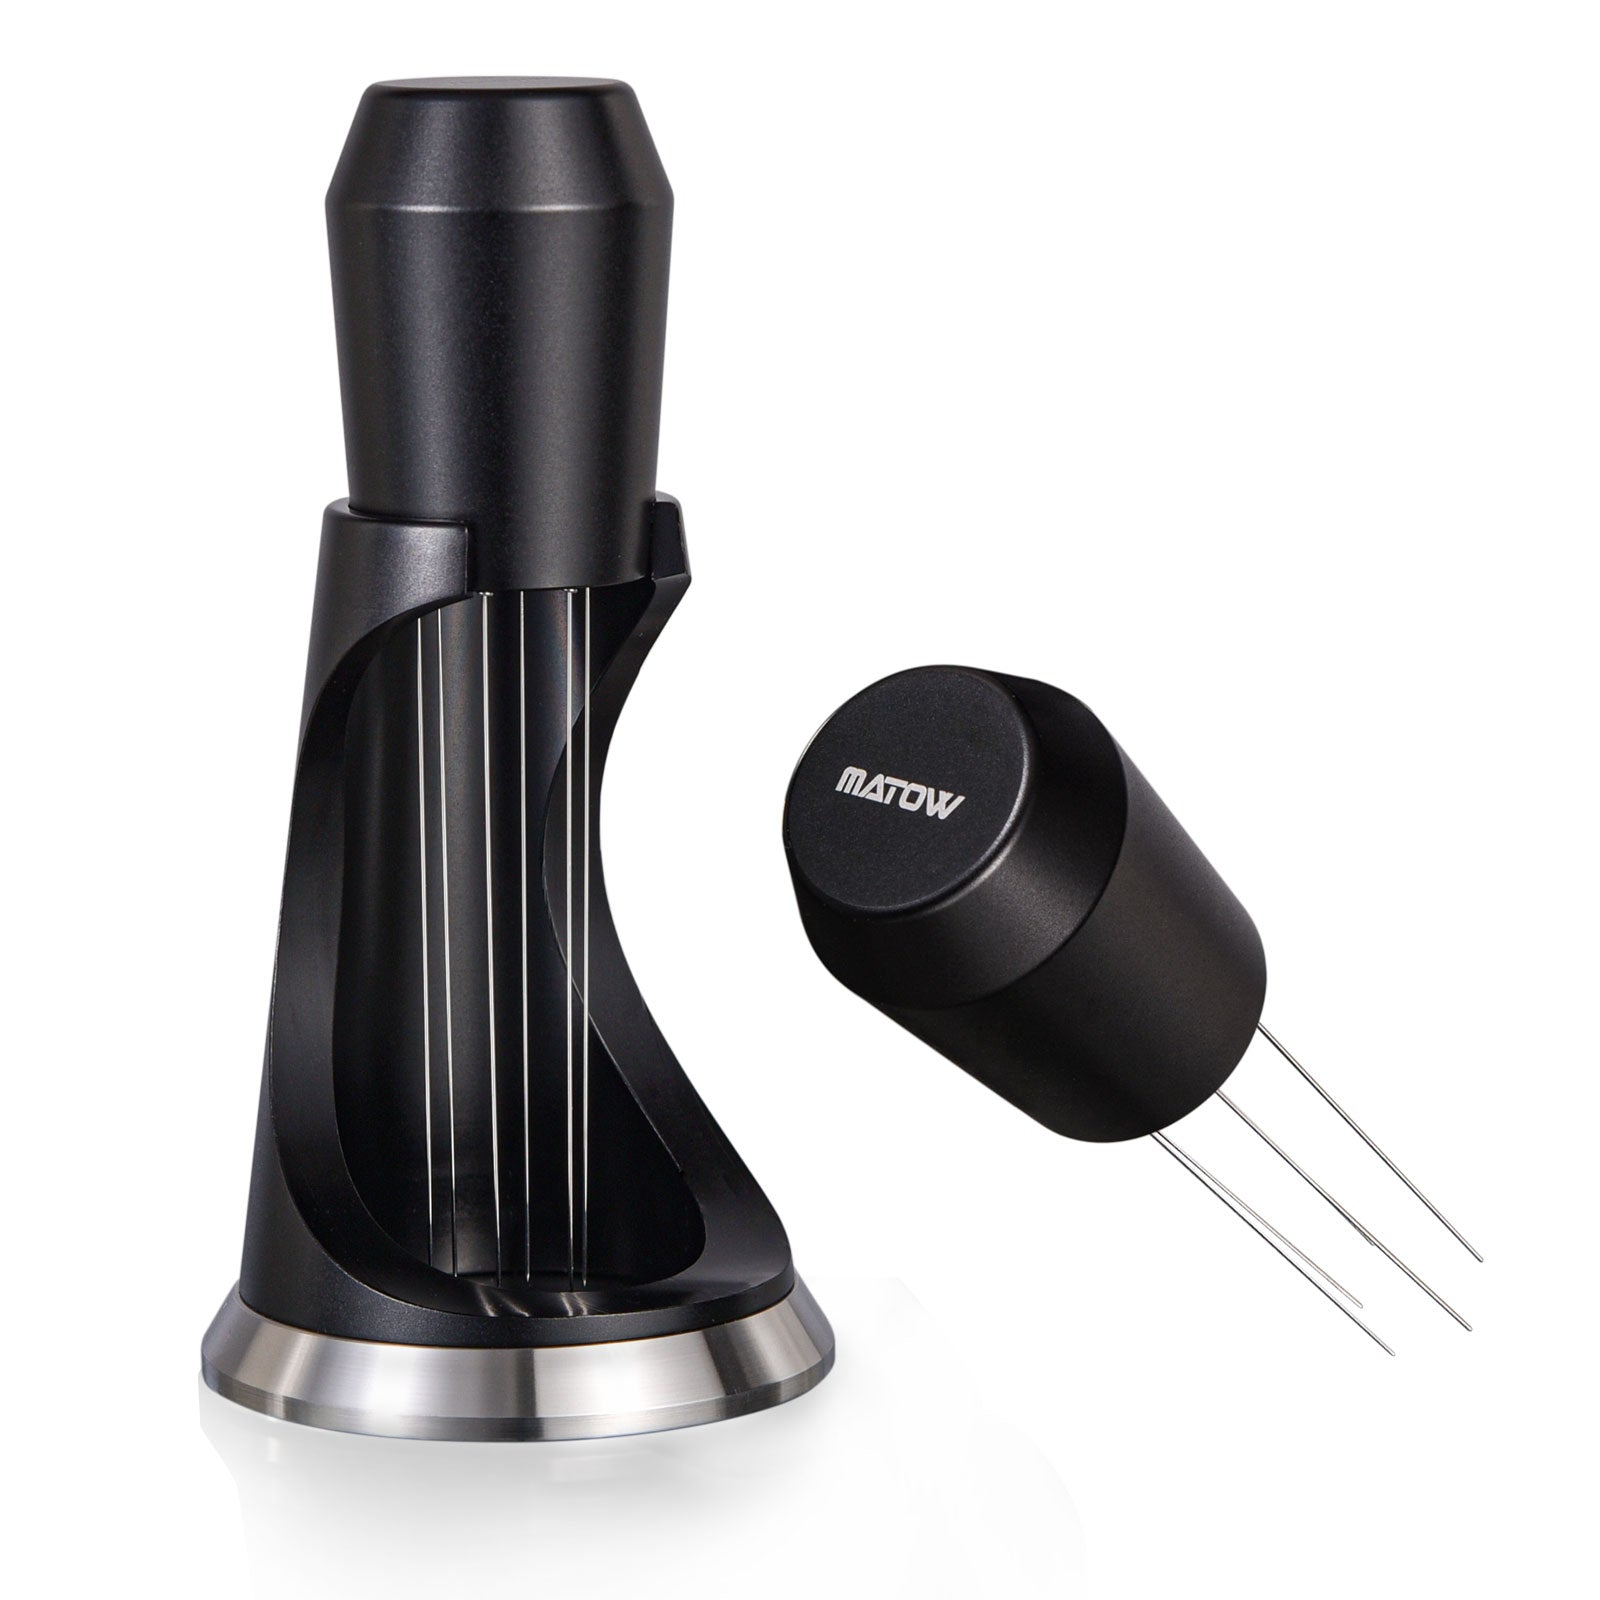  VEPEET Espresso Distribution Tool, Hand Tampers Stirring WDT  Tool, Needle Type Distributor, Made of 304 Stainless Steel(Black): Home &  Kitchen